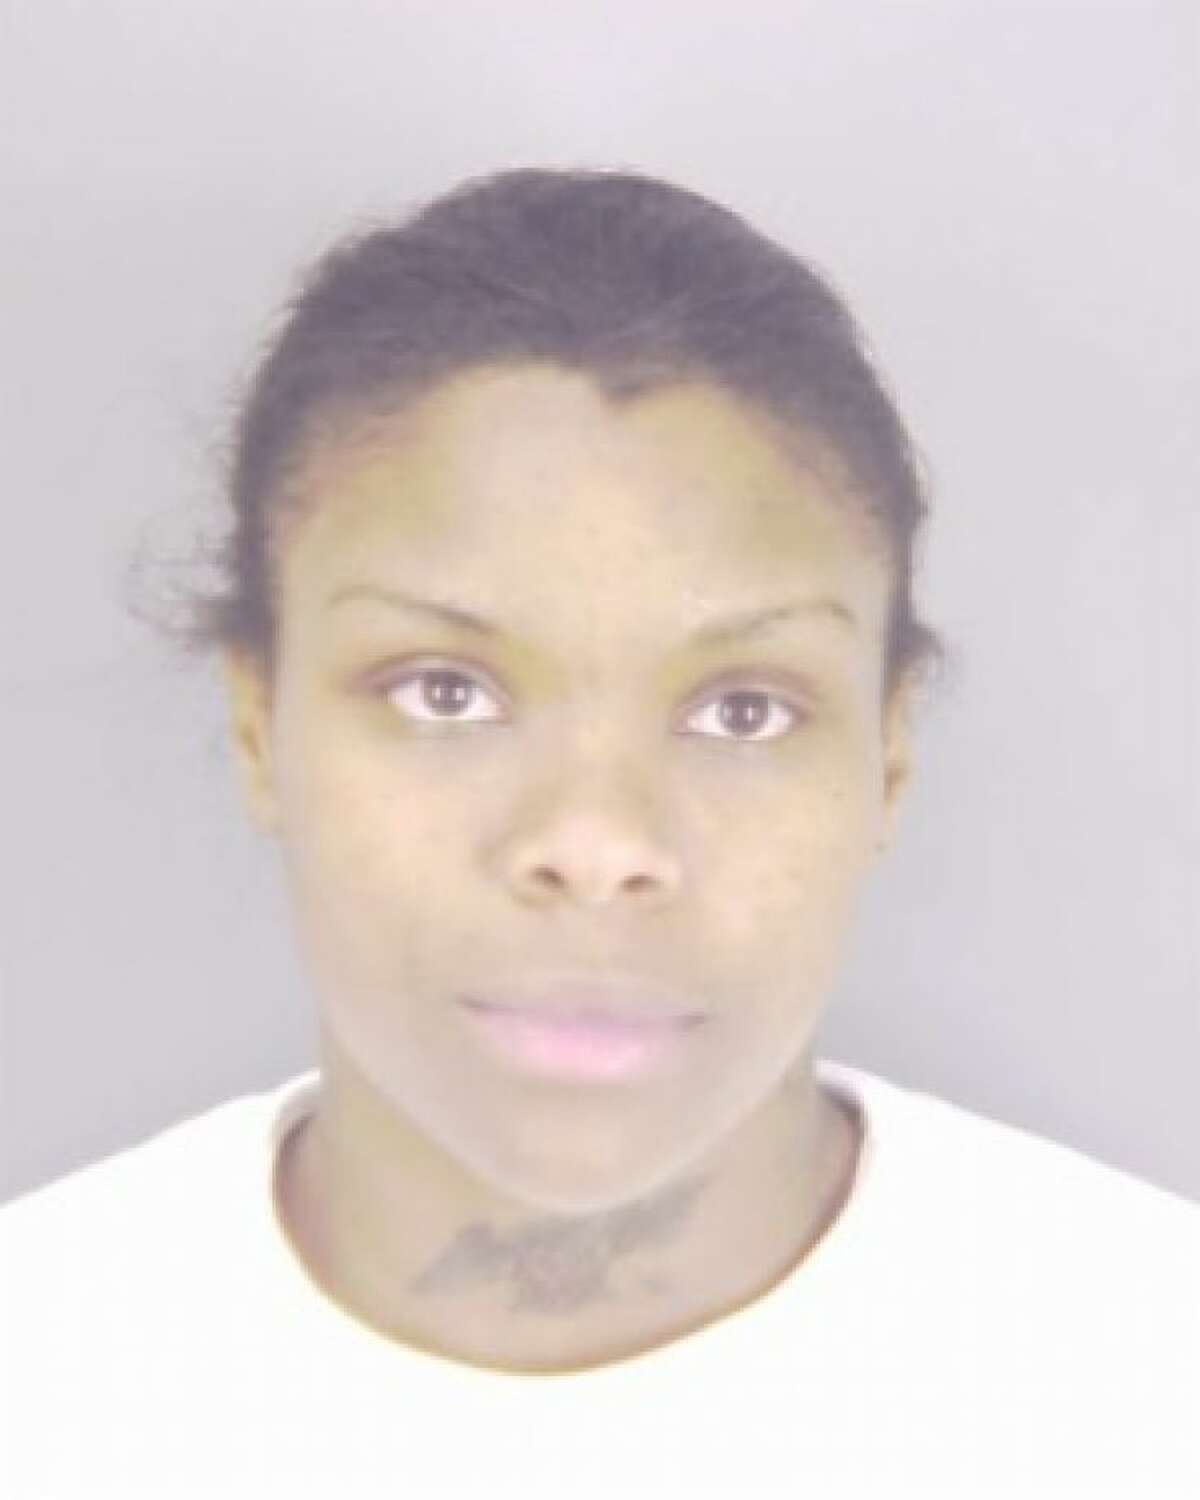 Ebony Andrews, 31, is accused of driving Joseph Colone Jr. from the home where Mary Goodman Hernandez and her daughter, Briana Goodman, died July 31, 2010.